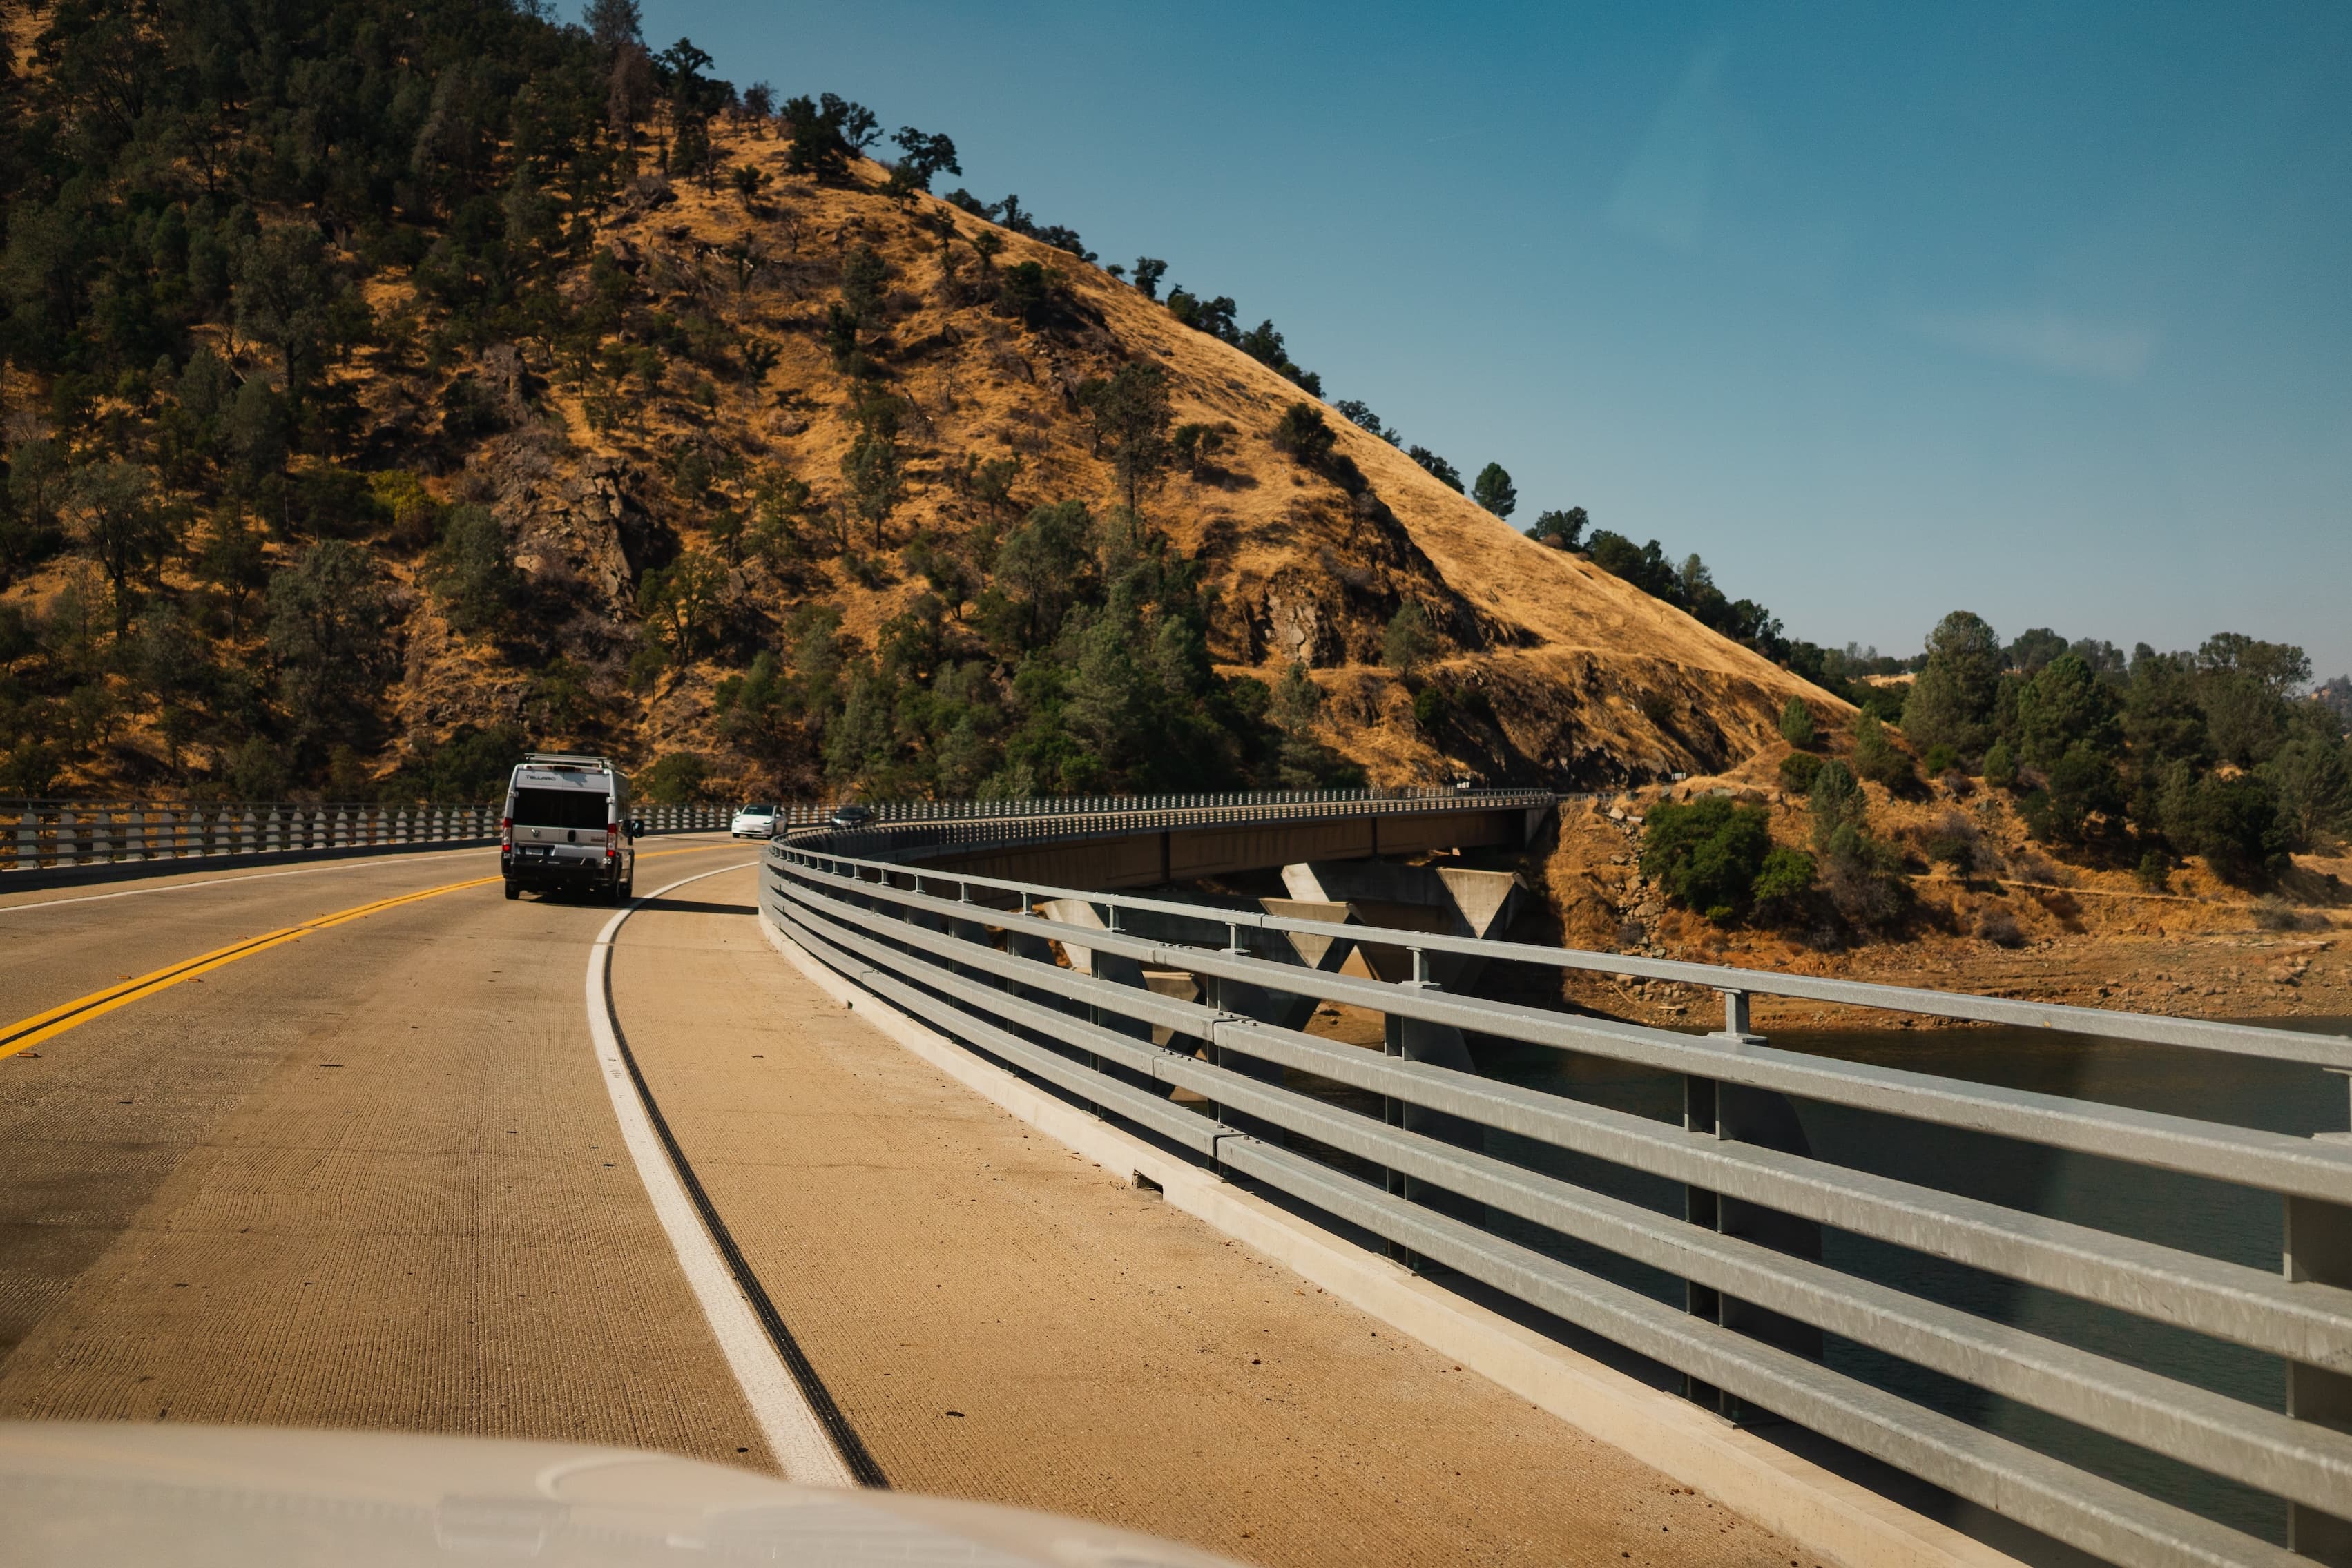 A road curves around a dry hillside with a guardrail on one side and a vehicle driving along, with clear blue skies above.